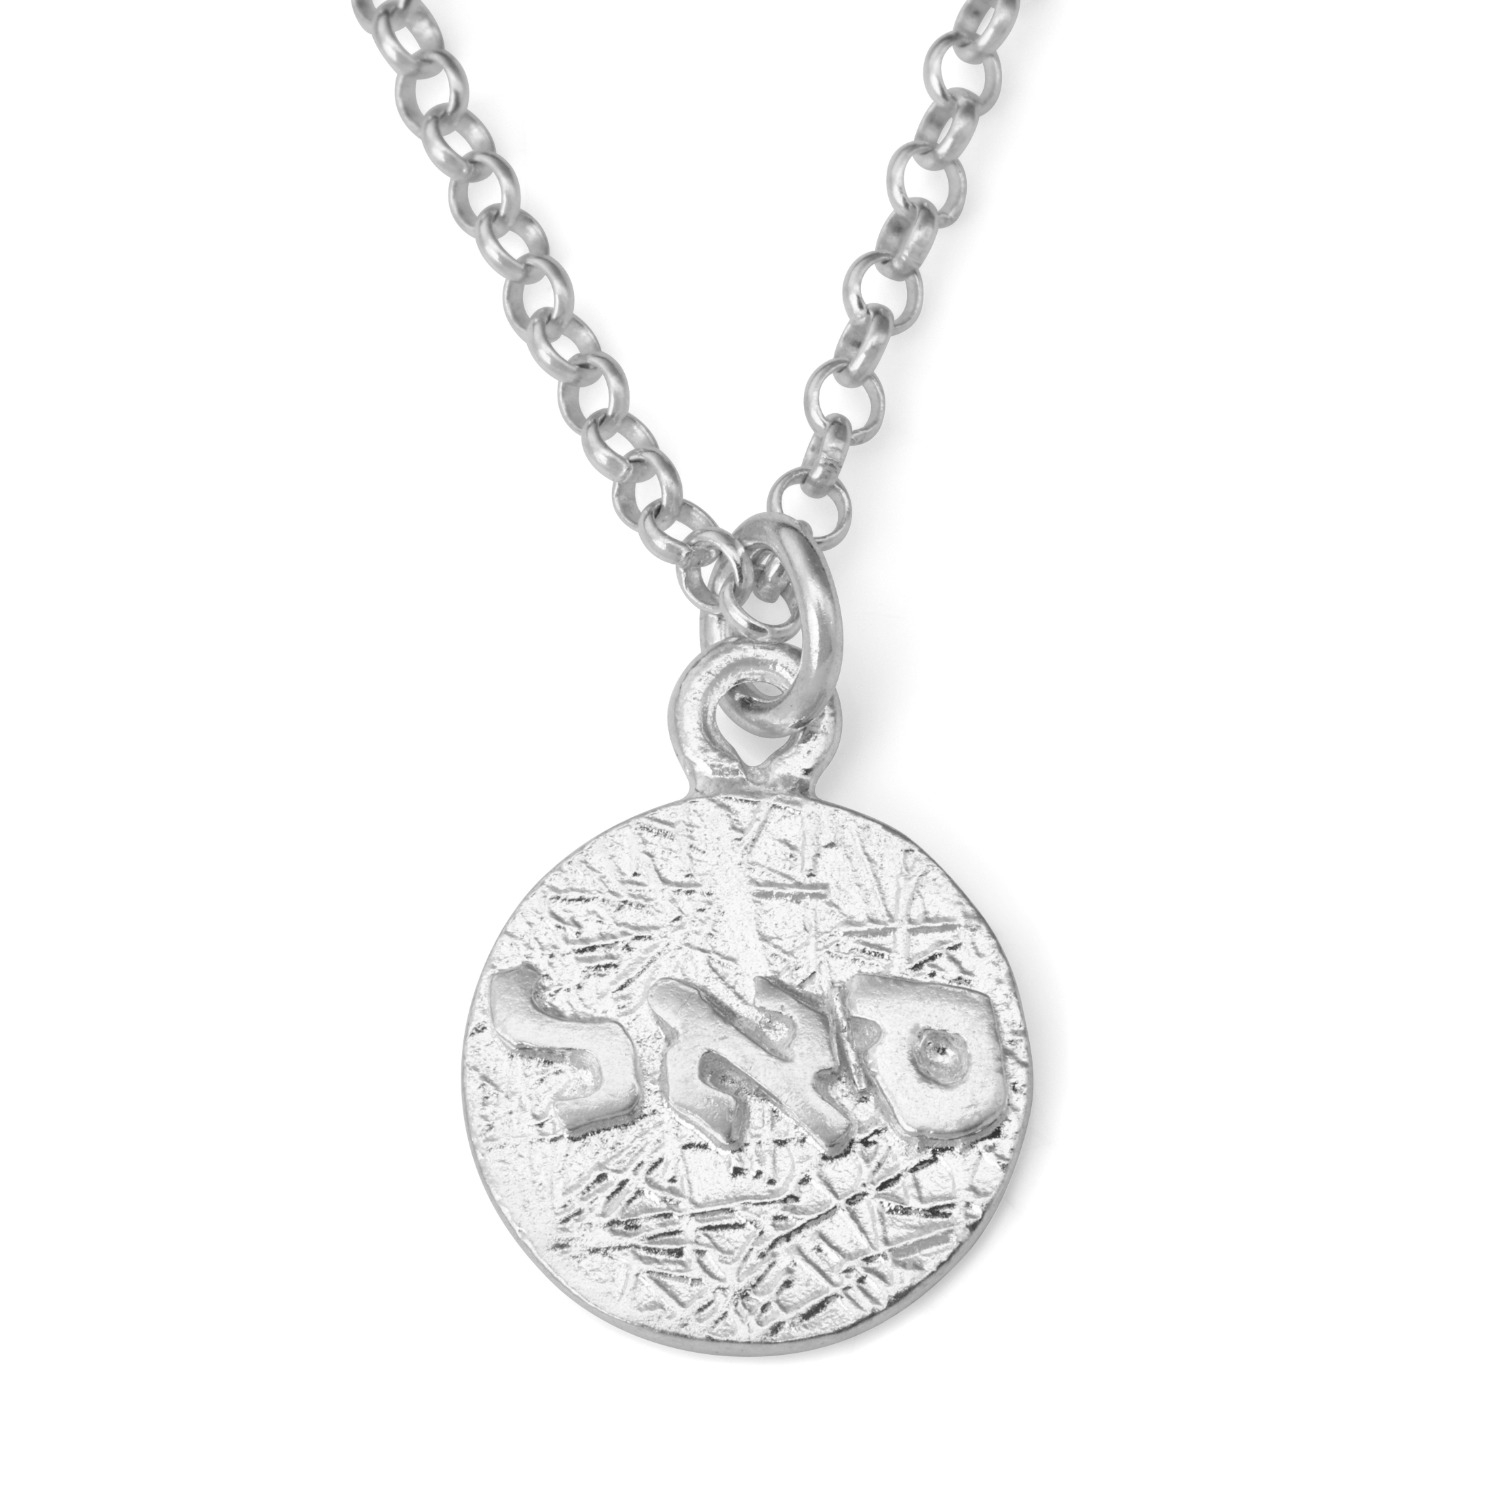 Wealth: Solid Sculpted Sterling Silver Pendant Necklace - 1